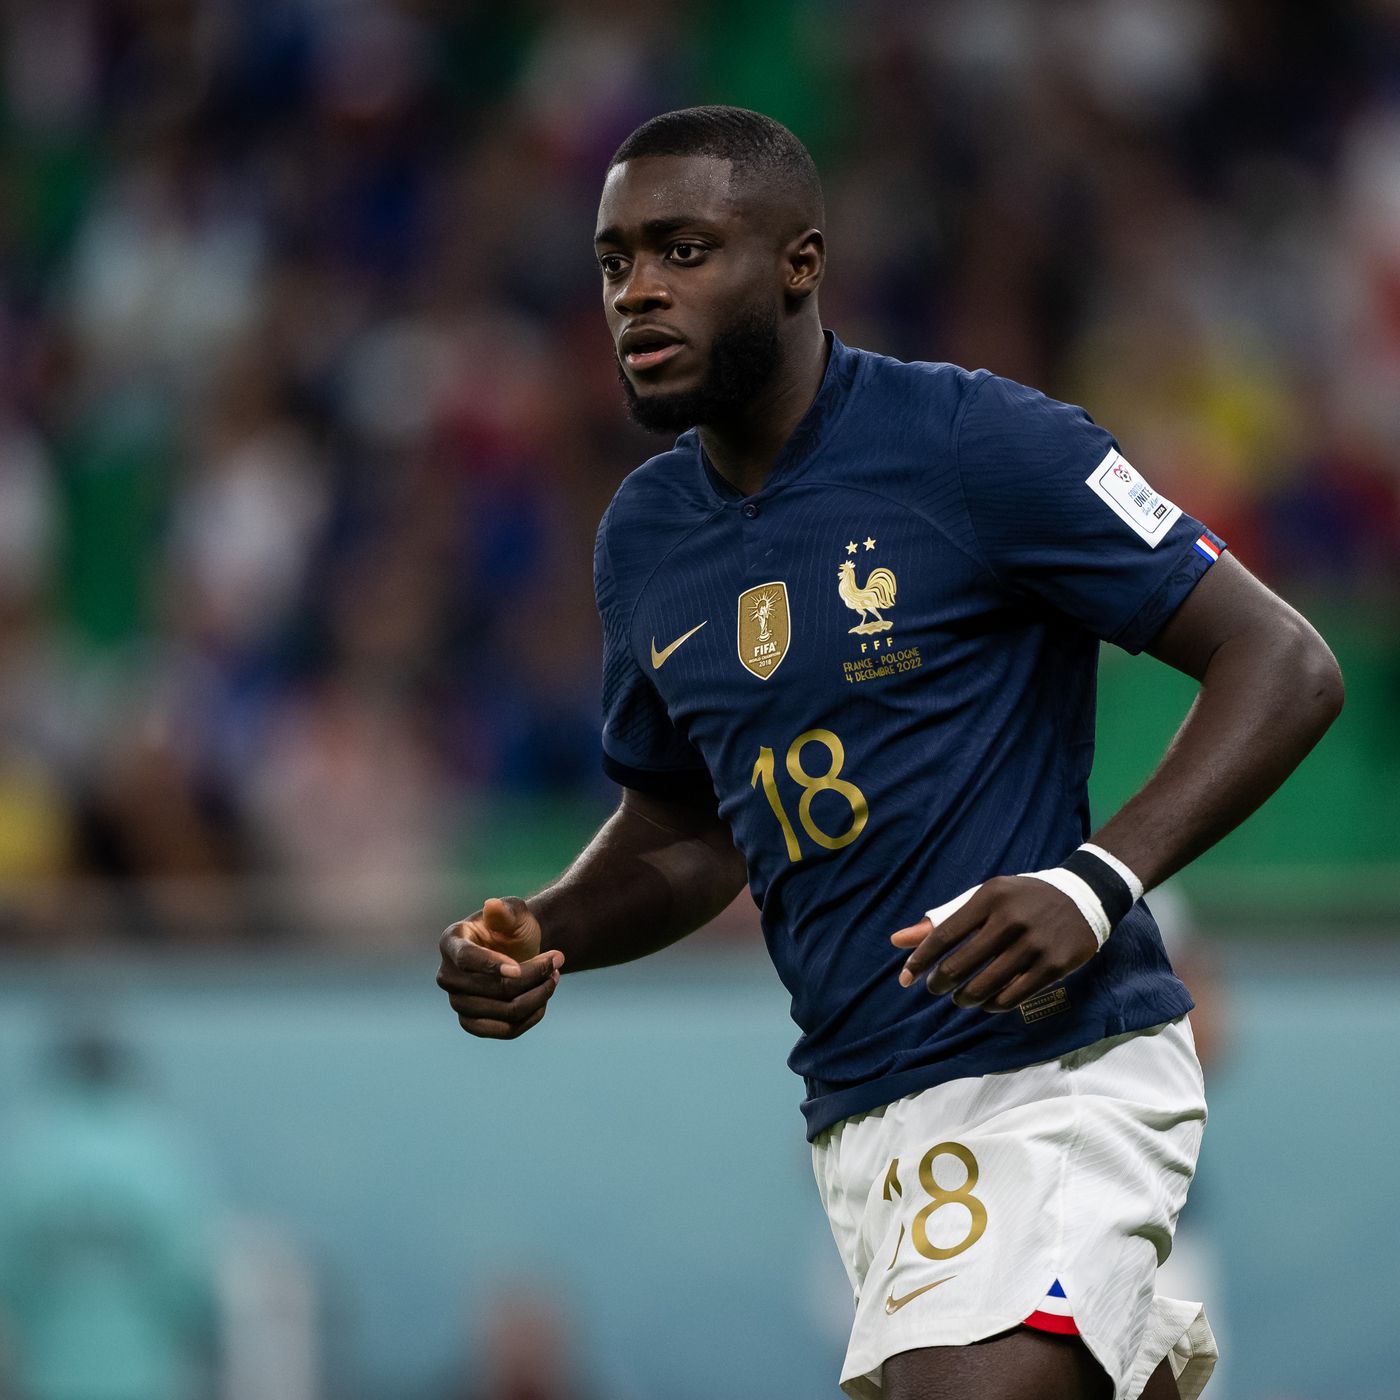 2022 World Cup: France Must Avoid Making Errors Against England –Upamecano